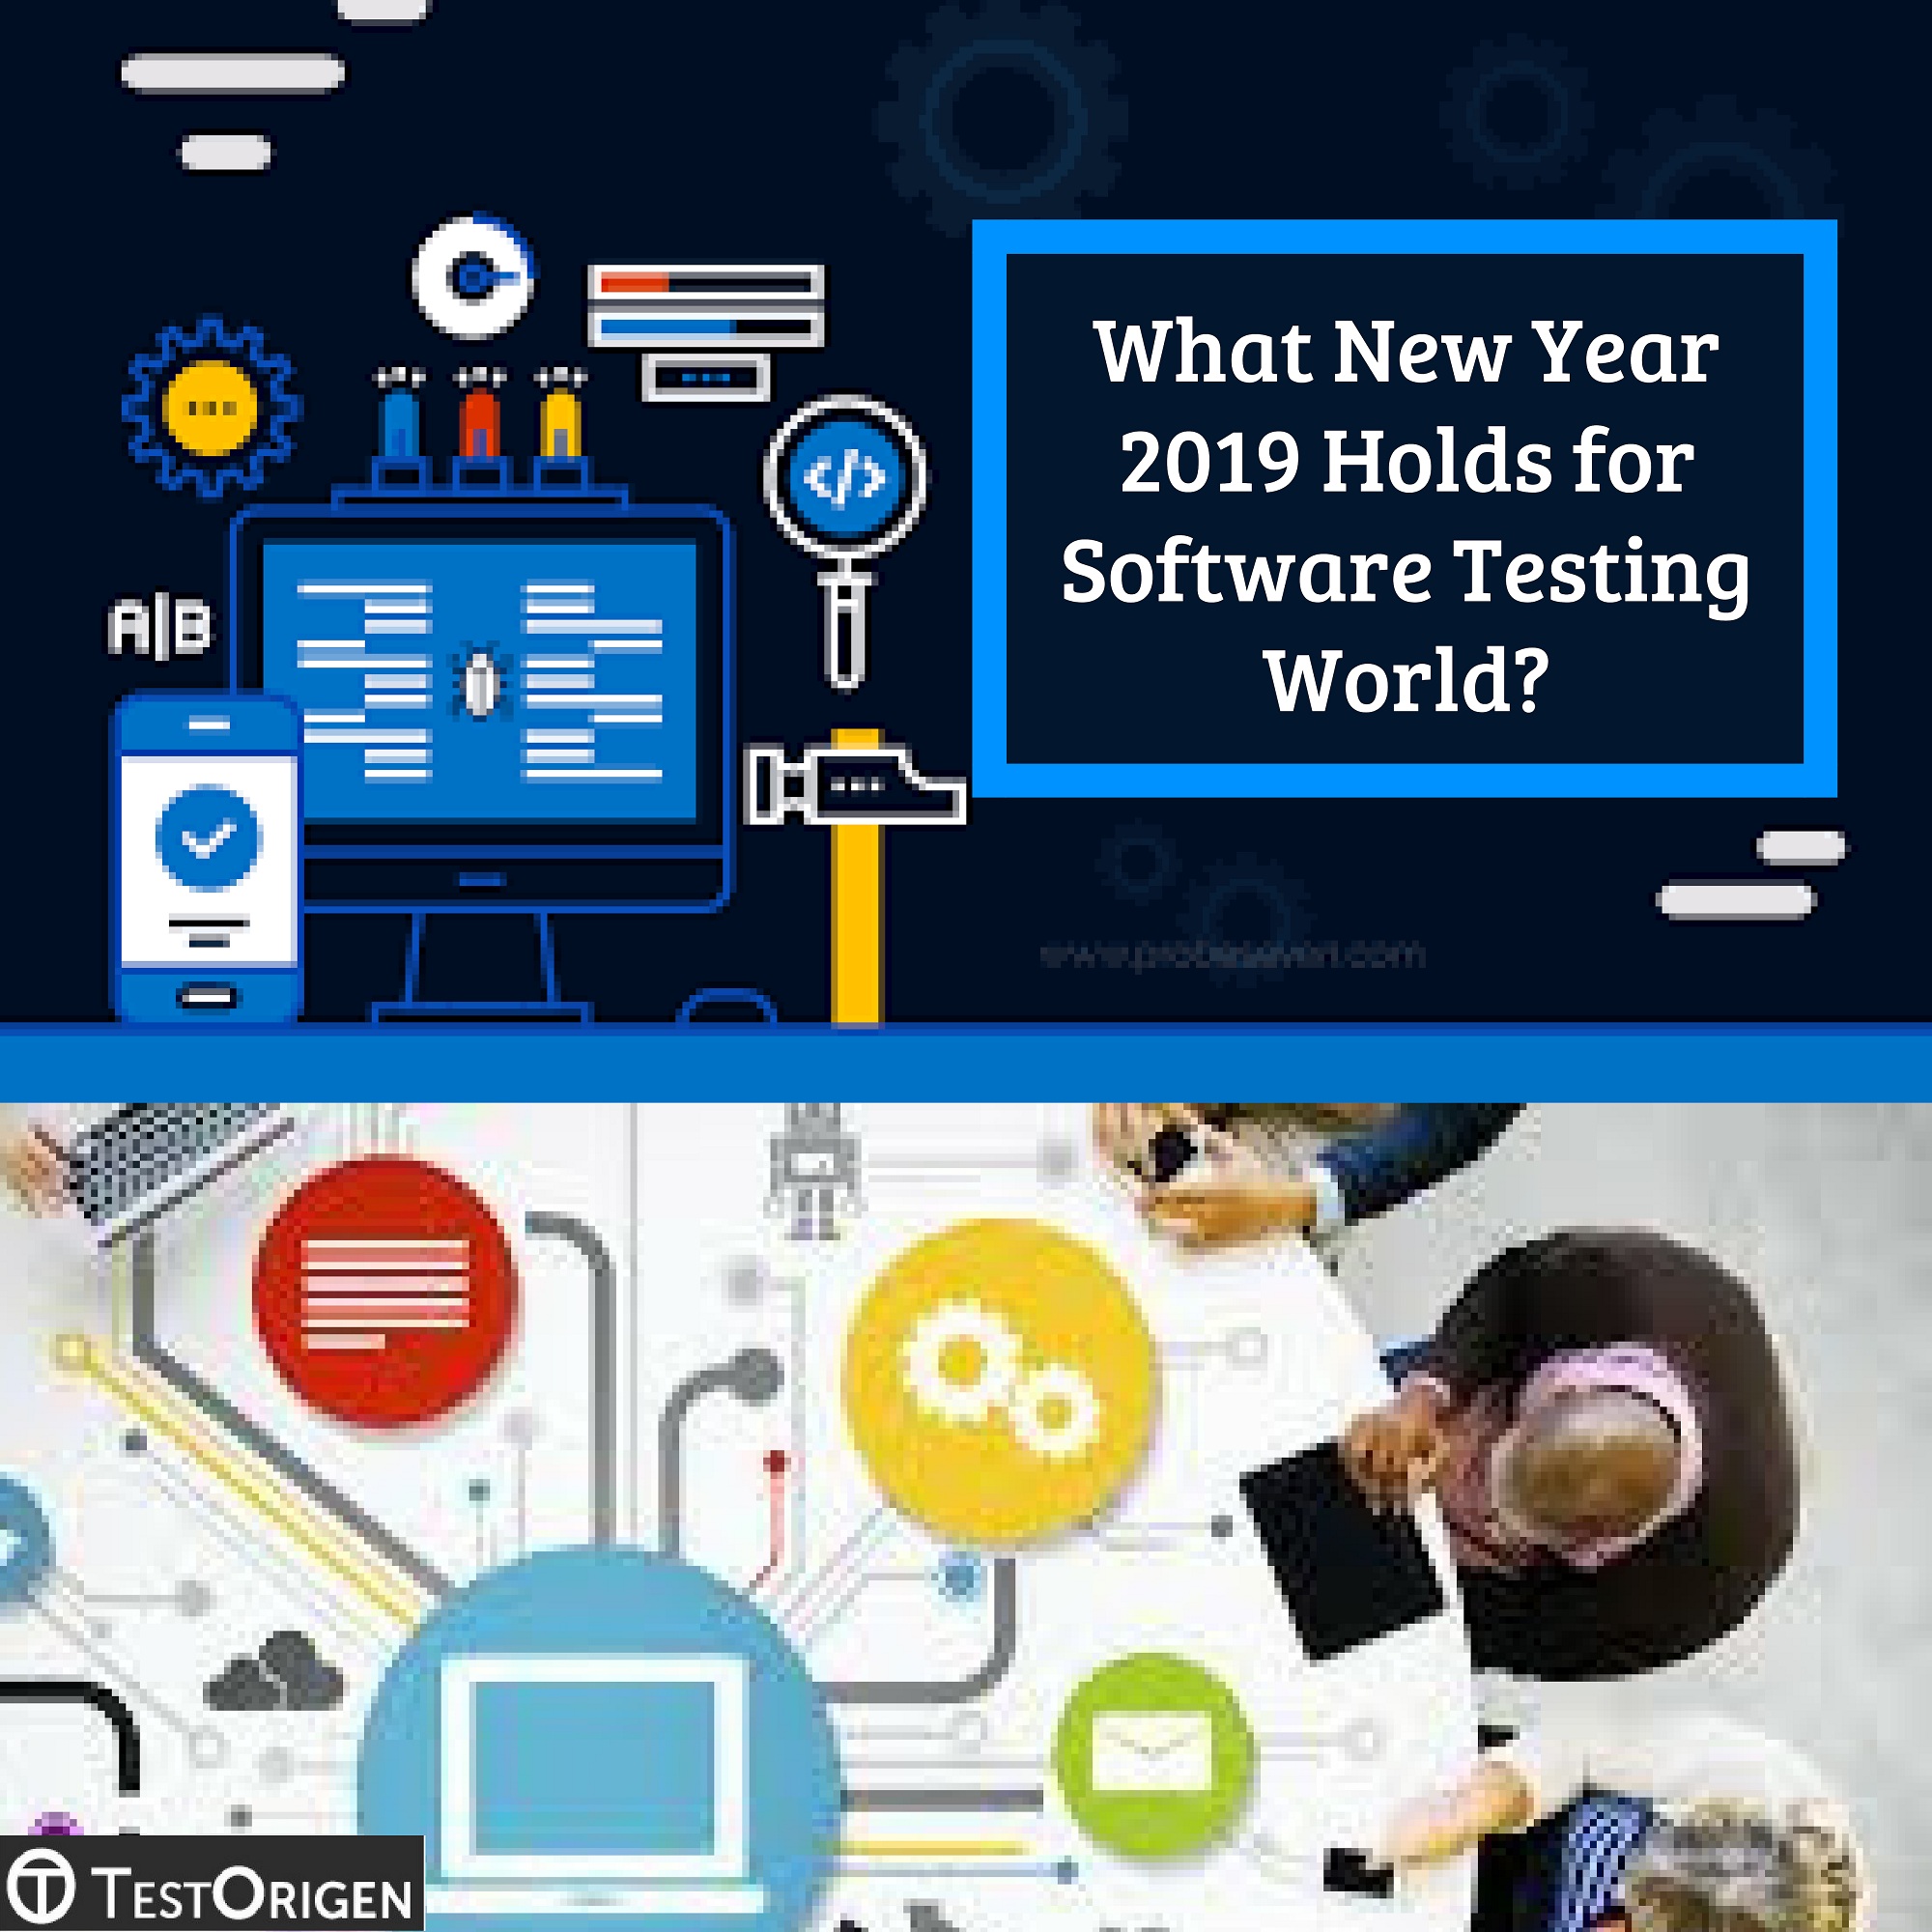 What New Year 2019 Holds for Software Testing World?